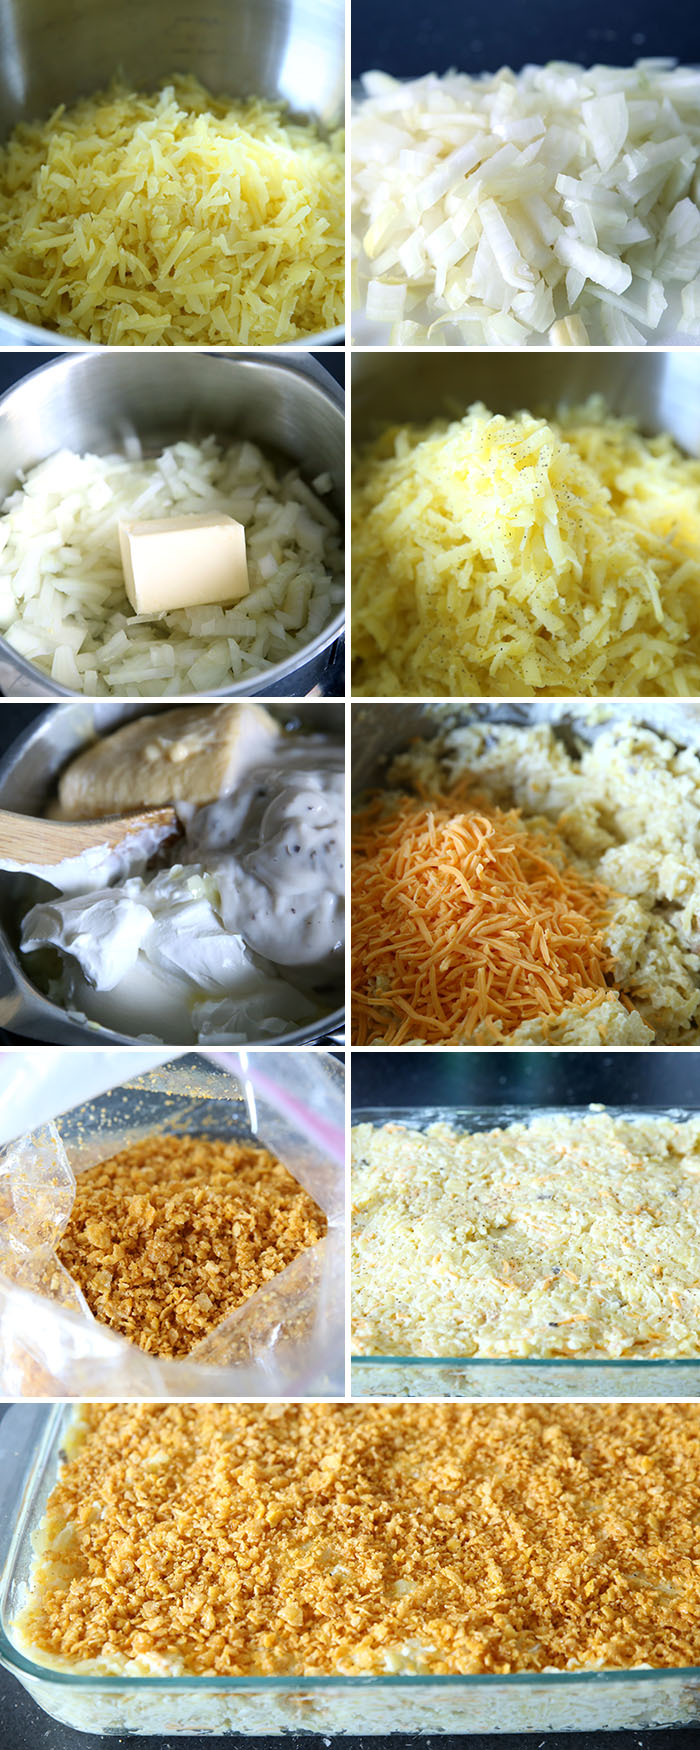 Step by step picture collage of how to make yummy funeral potatoes. There are nine pictures showing the steps